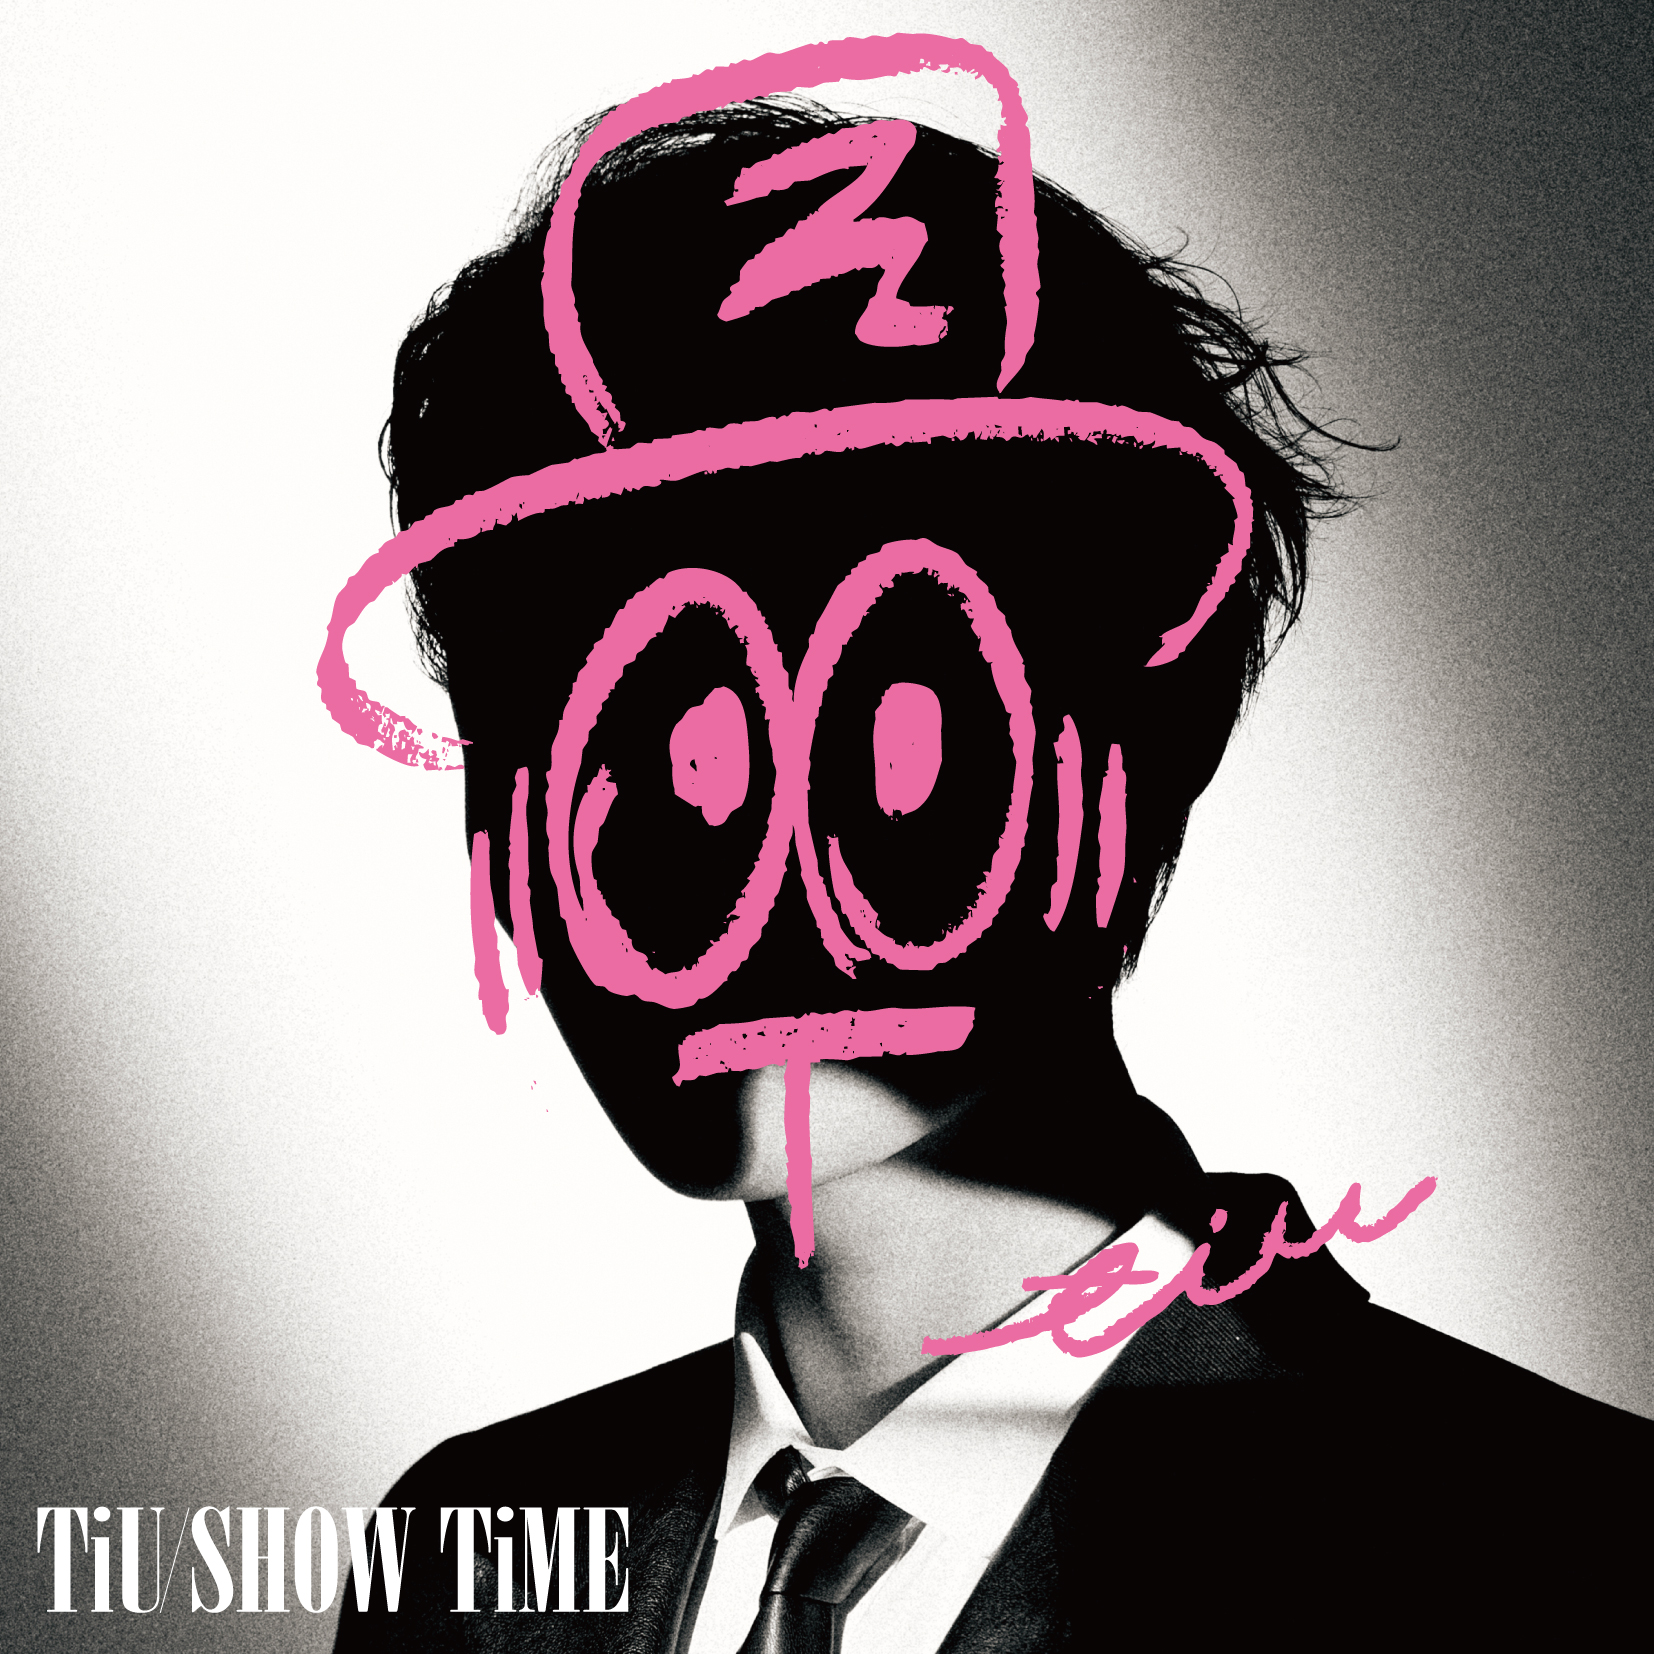 「SHOW TiME」